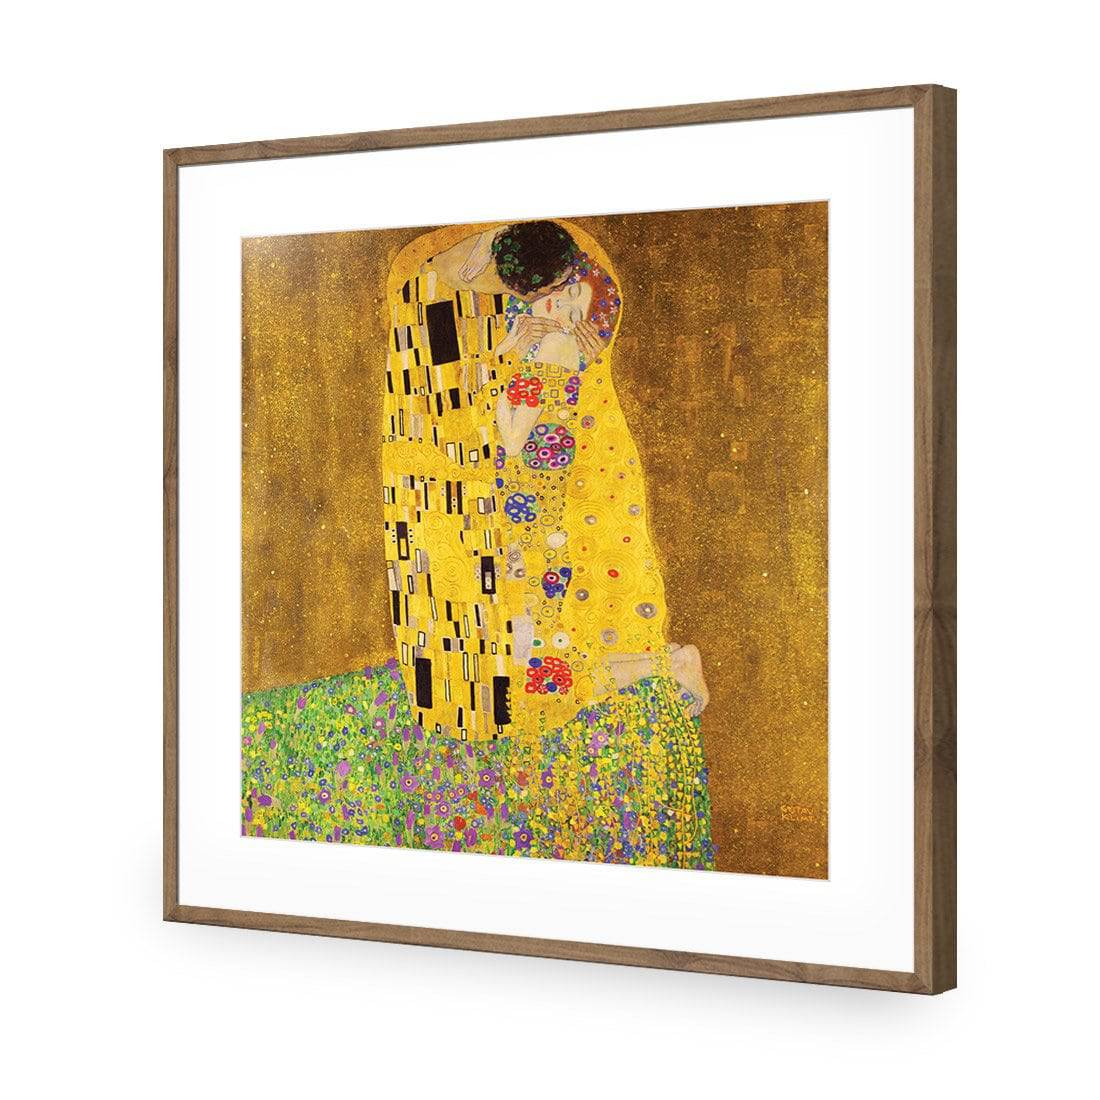 The Kiss, Square-Acrylic-Wall Art Design-With Border-Acrylic - Natural Frame-37x37cm-Wall Art Designs